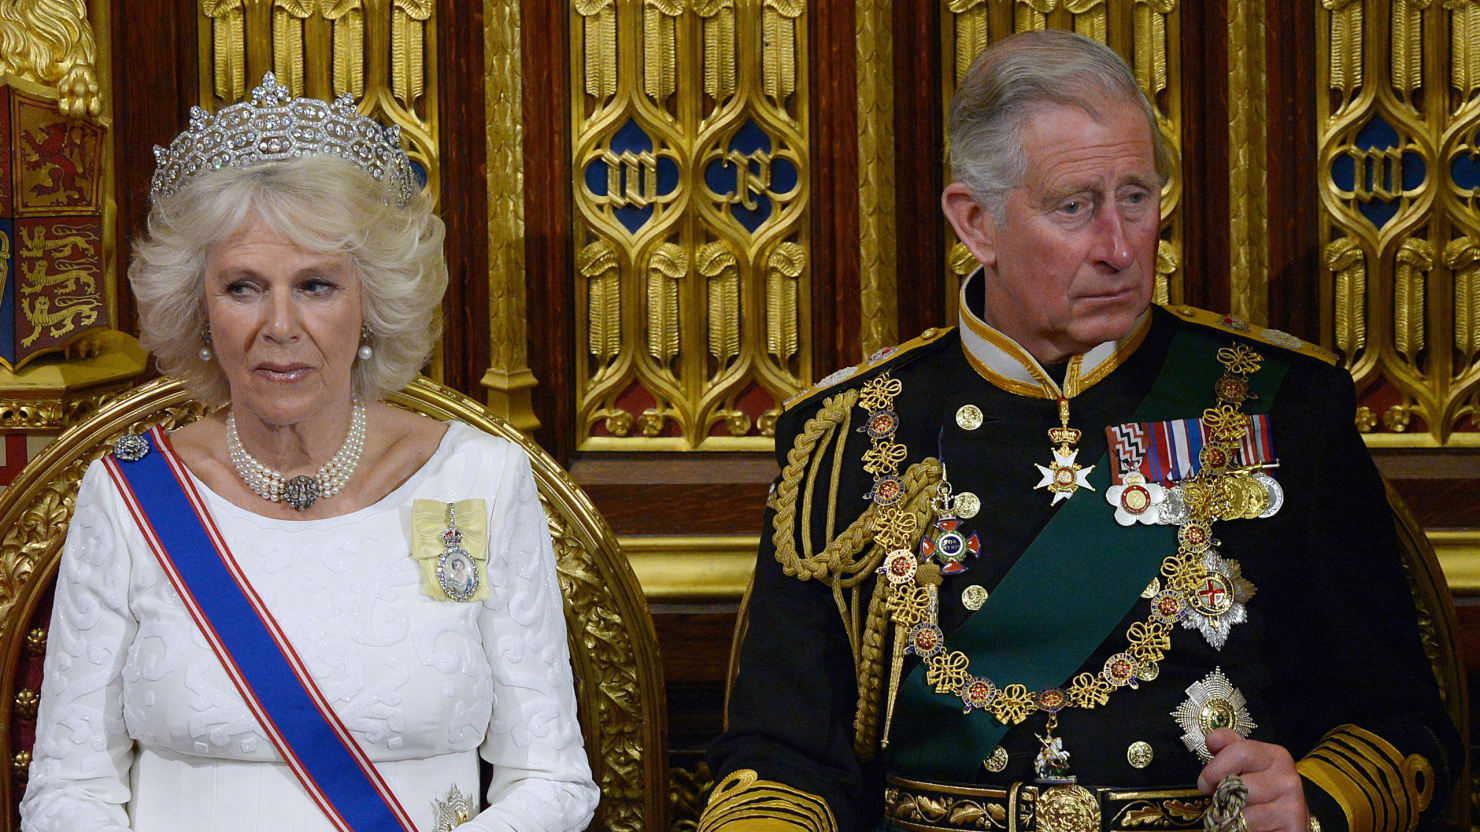 Imagining Prince Charles as King Makes All of Britain Wish They Could